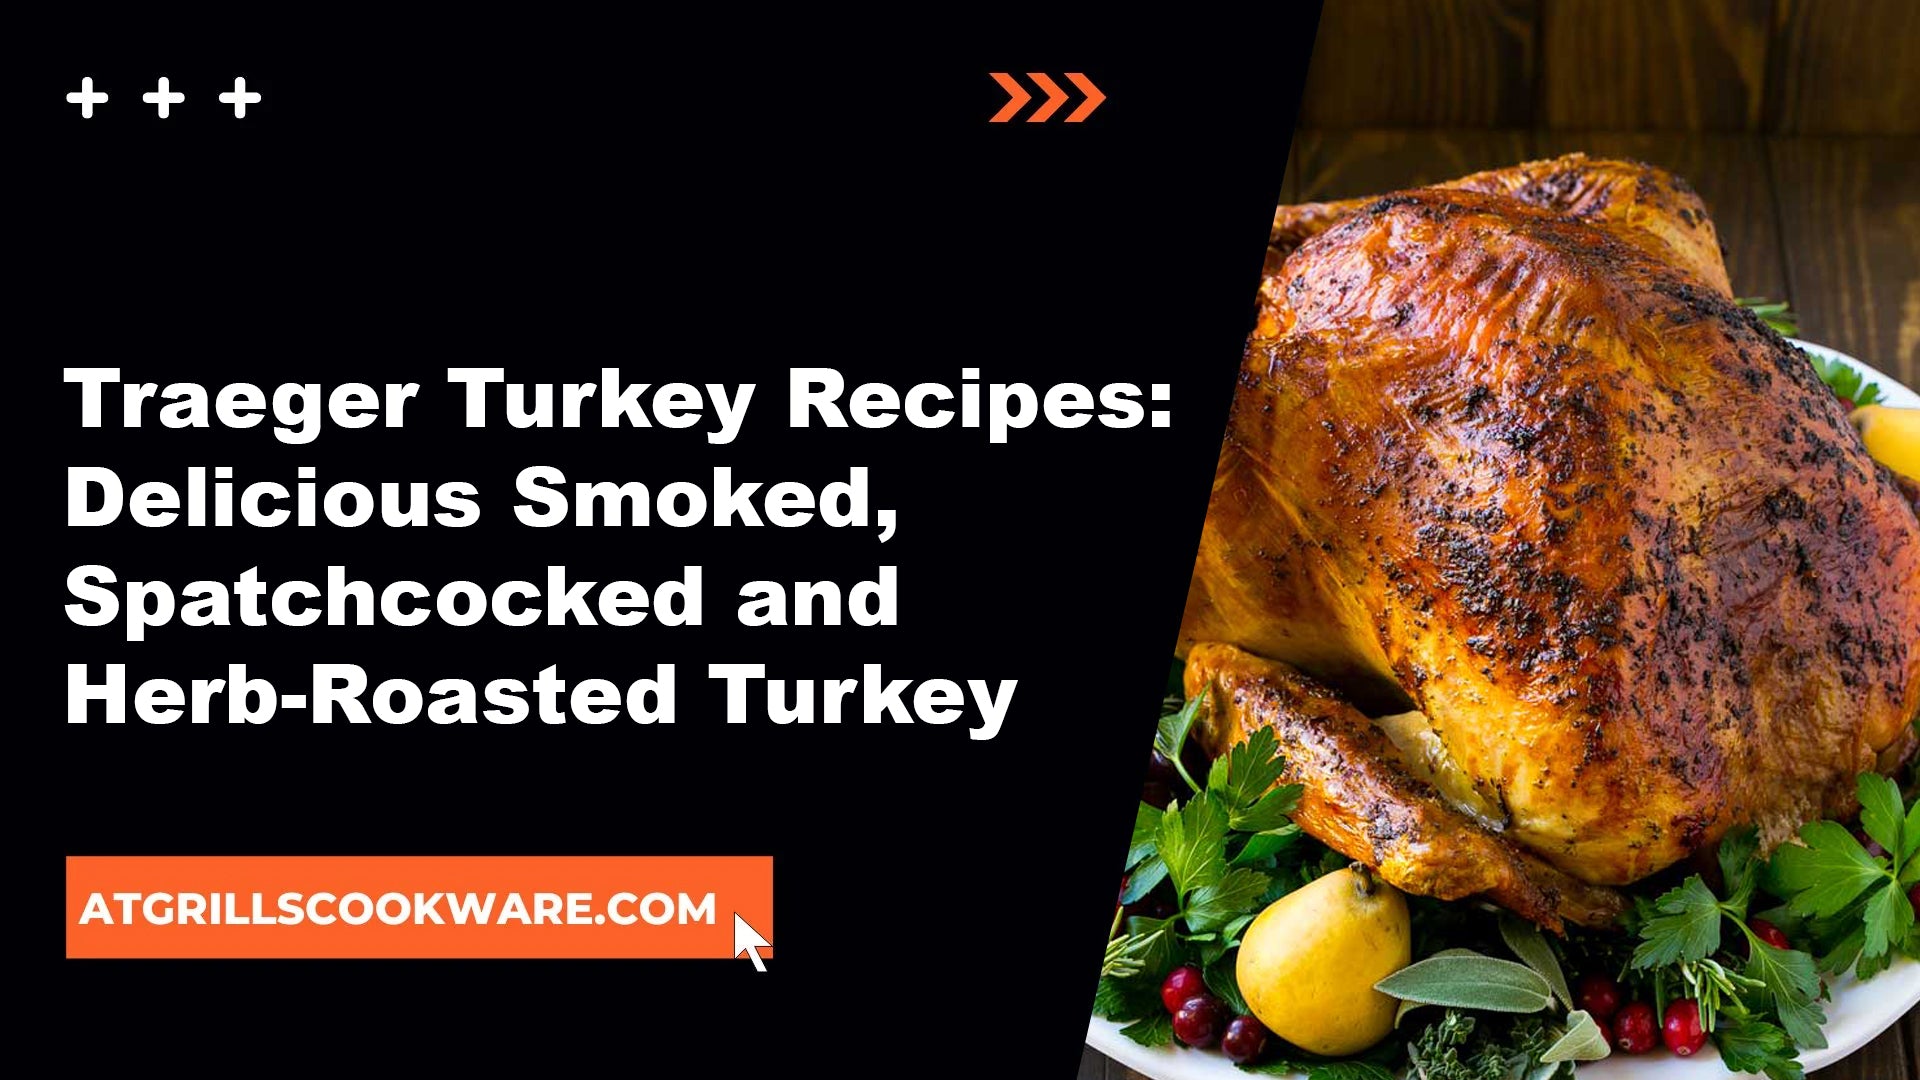 Traeger Turkey Recipes: Perfect Smoked, Spatchcocked, and Herb-Roasted Turkey